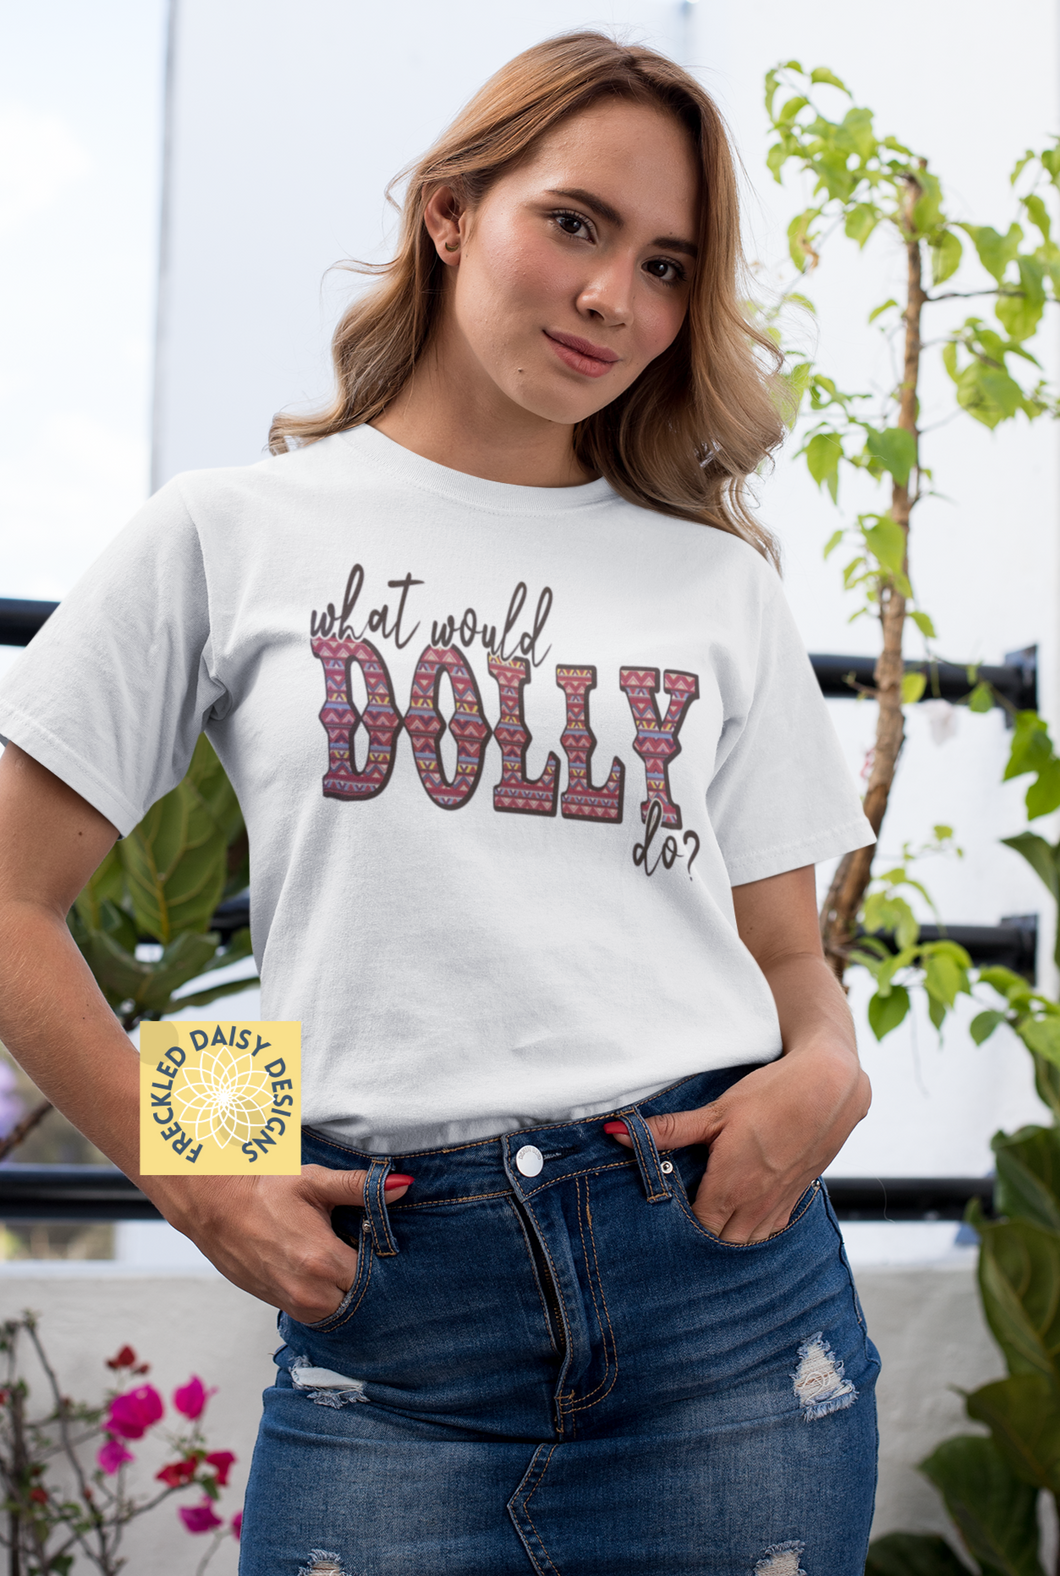 What would Dolly do?